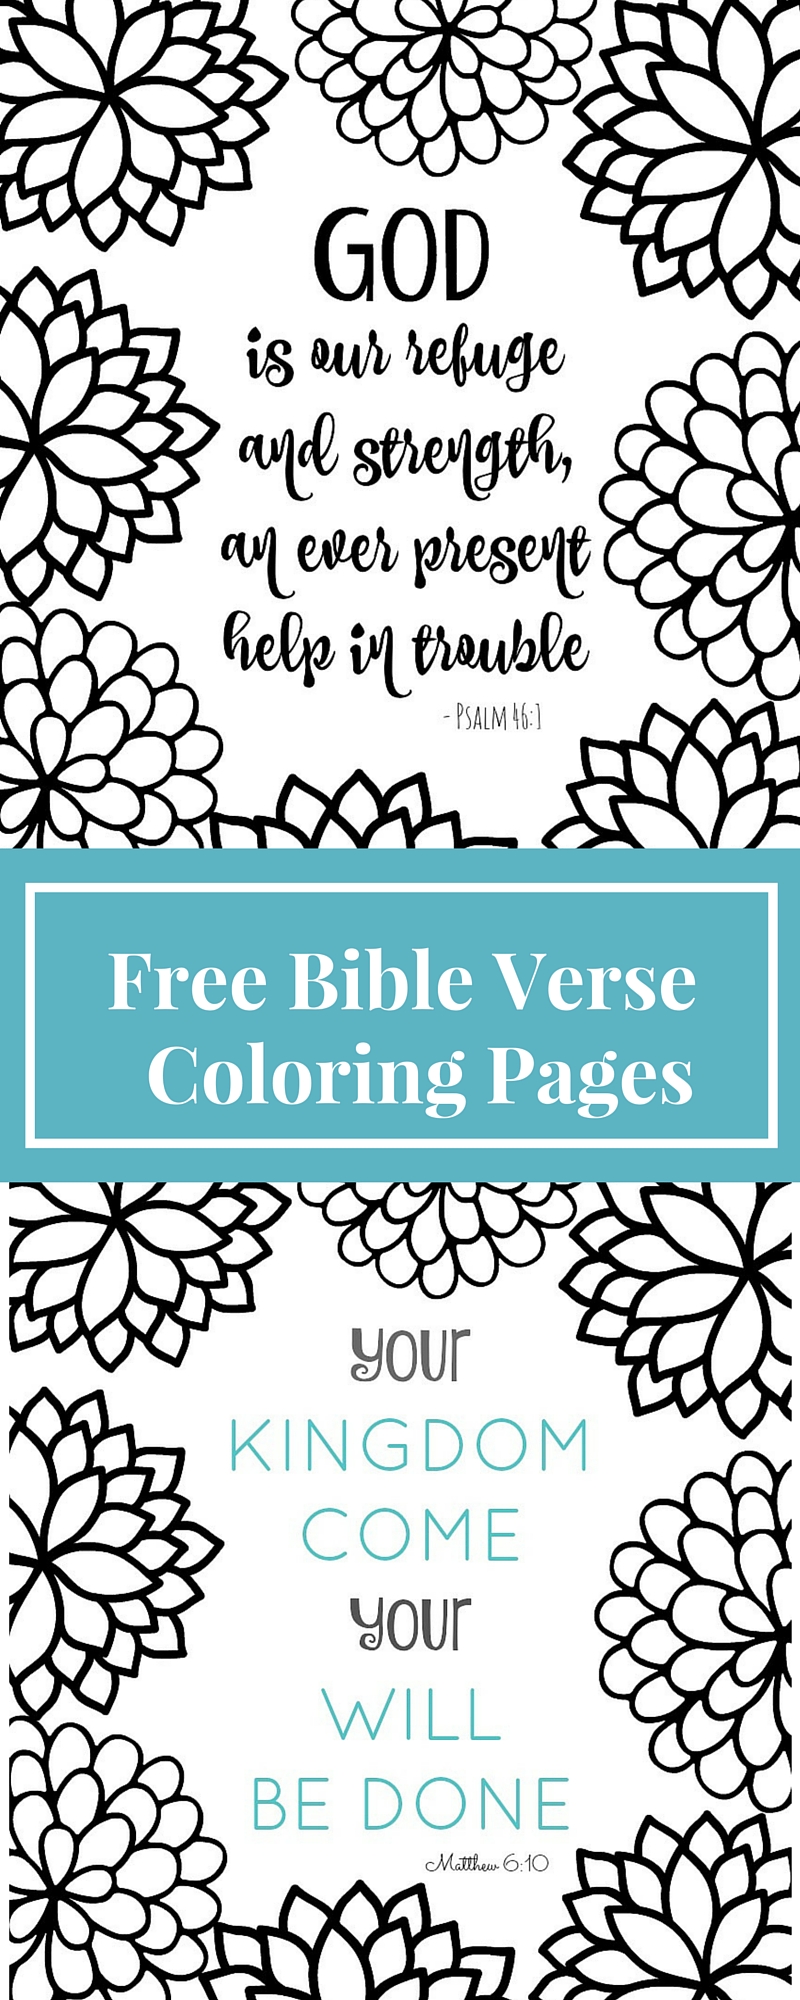 Free Printable Bible Verse Coloring Pages with Bursting Blossoms - What